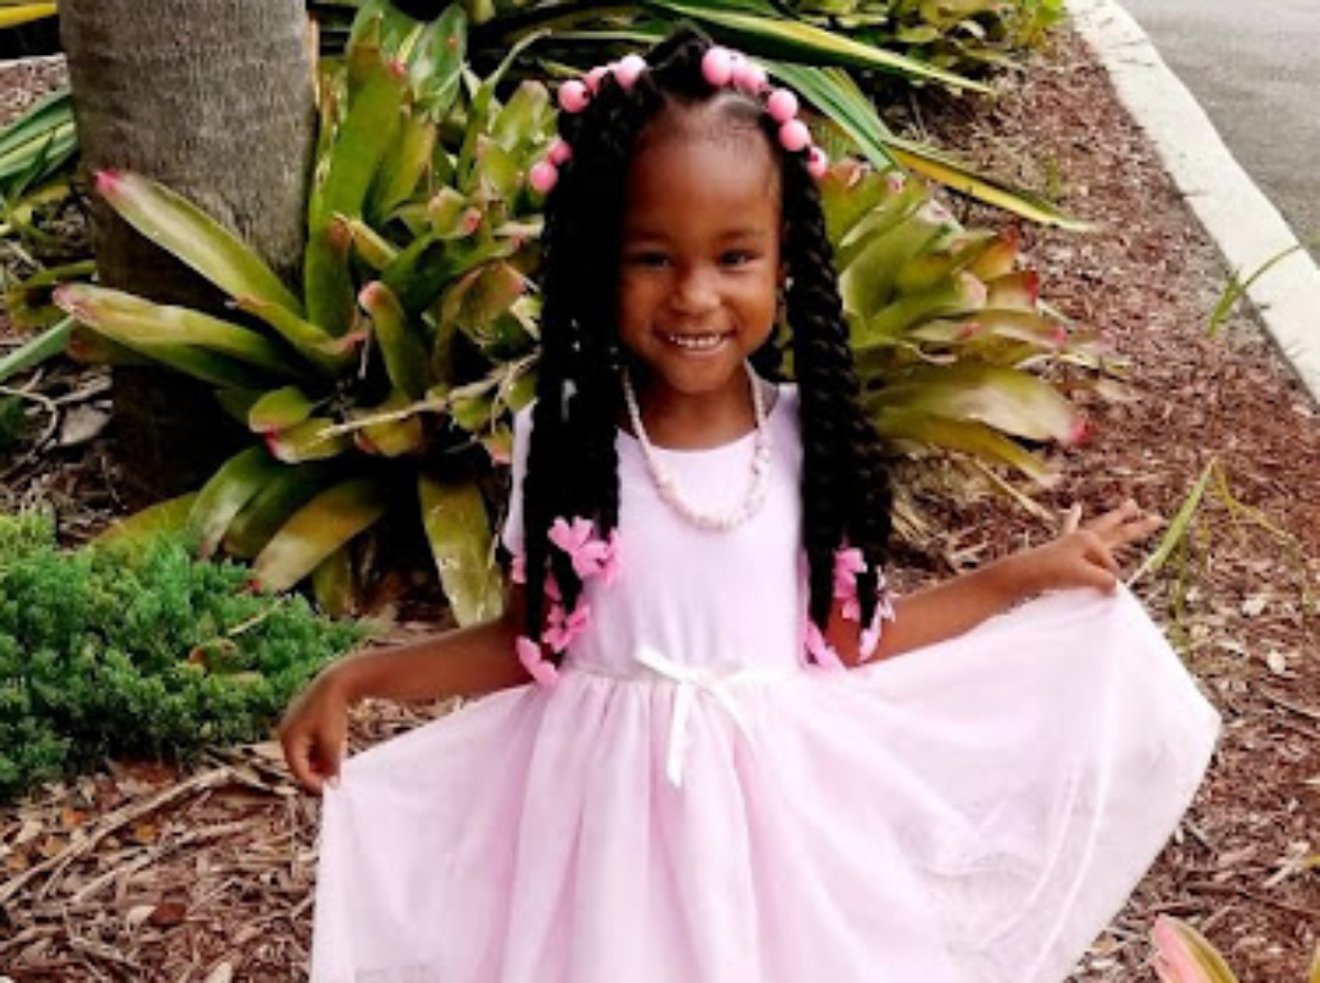 Seven-year-old Amaria Clark was allegedly bullied and physically injured by a teacher at Airbase K-8 Center in Homestead.